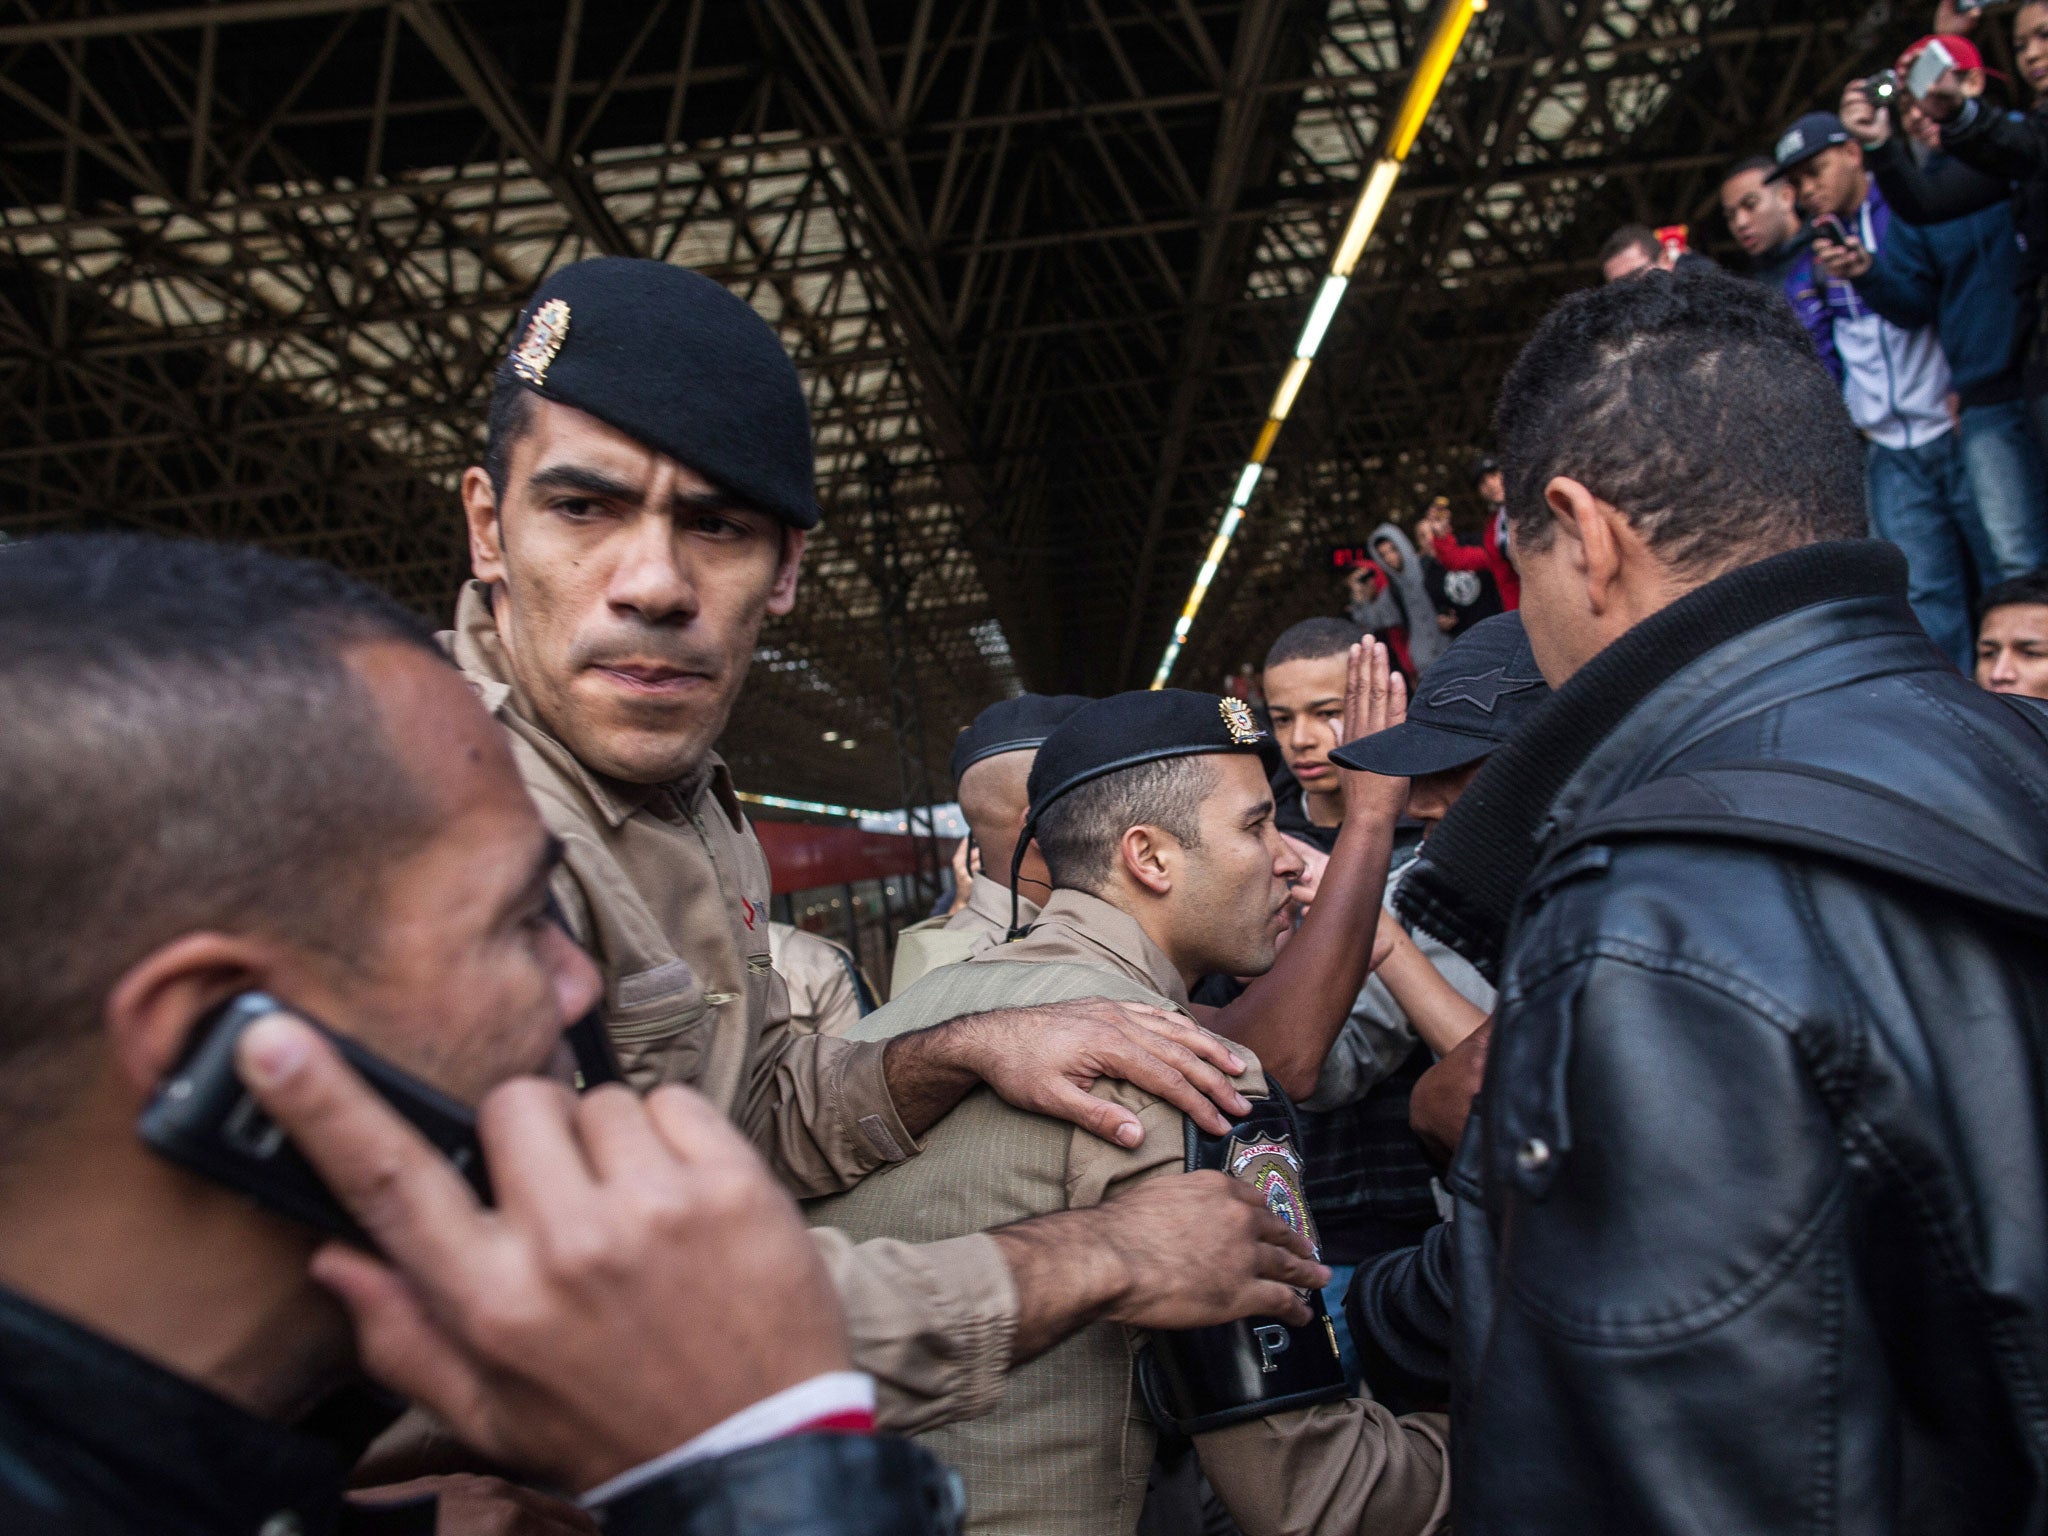 Police and strikers clash after second day of industrial action on Sao Paulo's underground